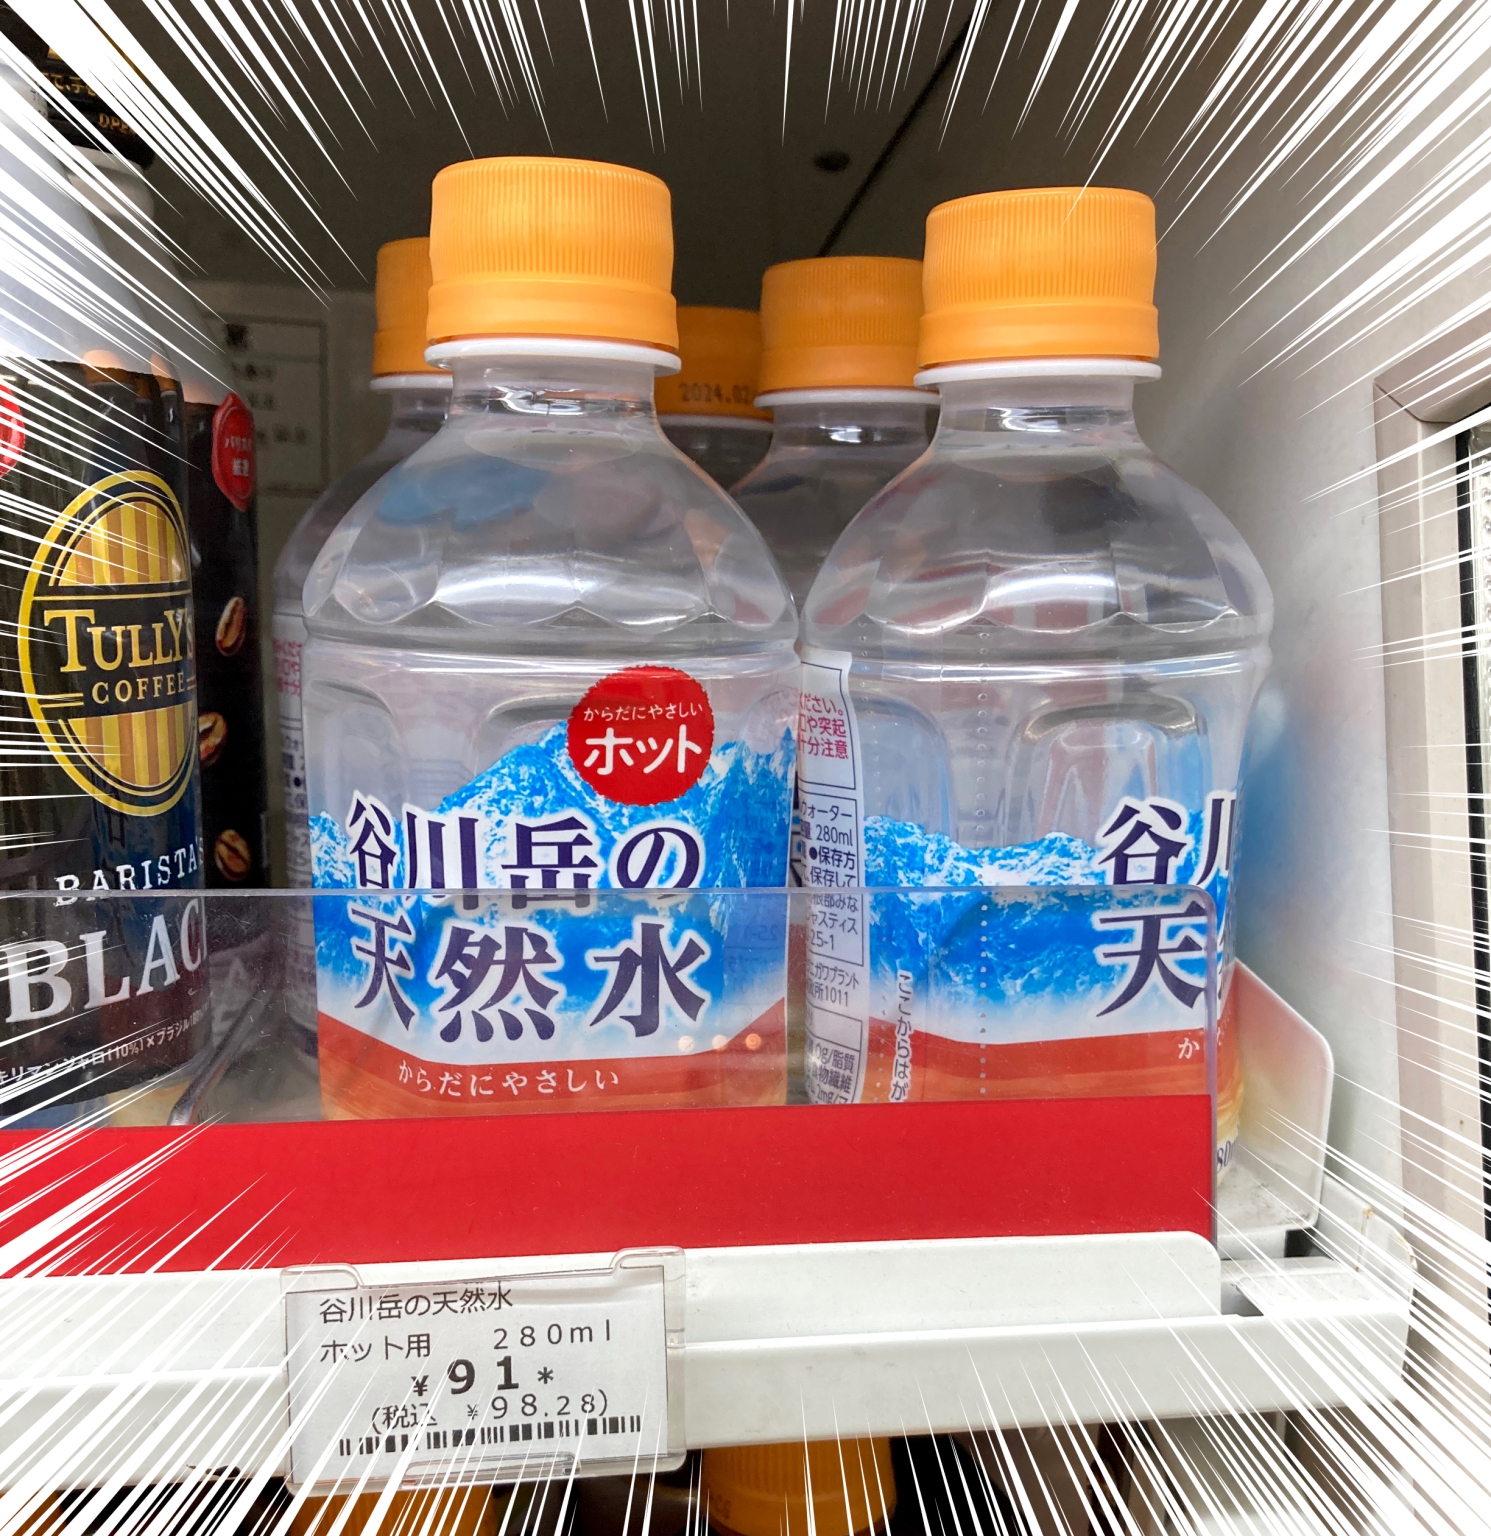 Japanese-convenience-stores-7-Eleven-hot-water-drinks-review-new-photos-3.jpg